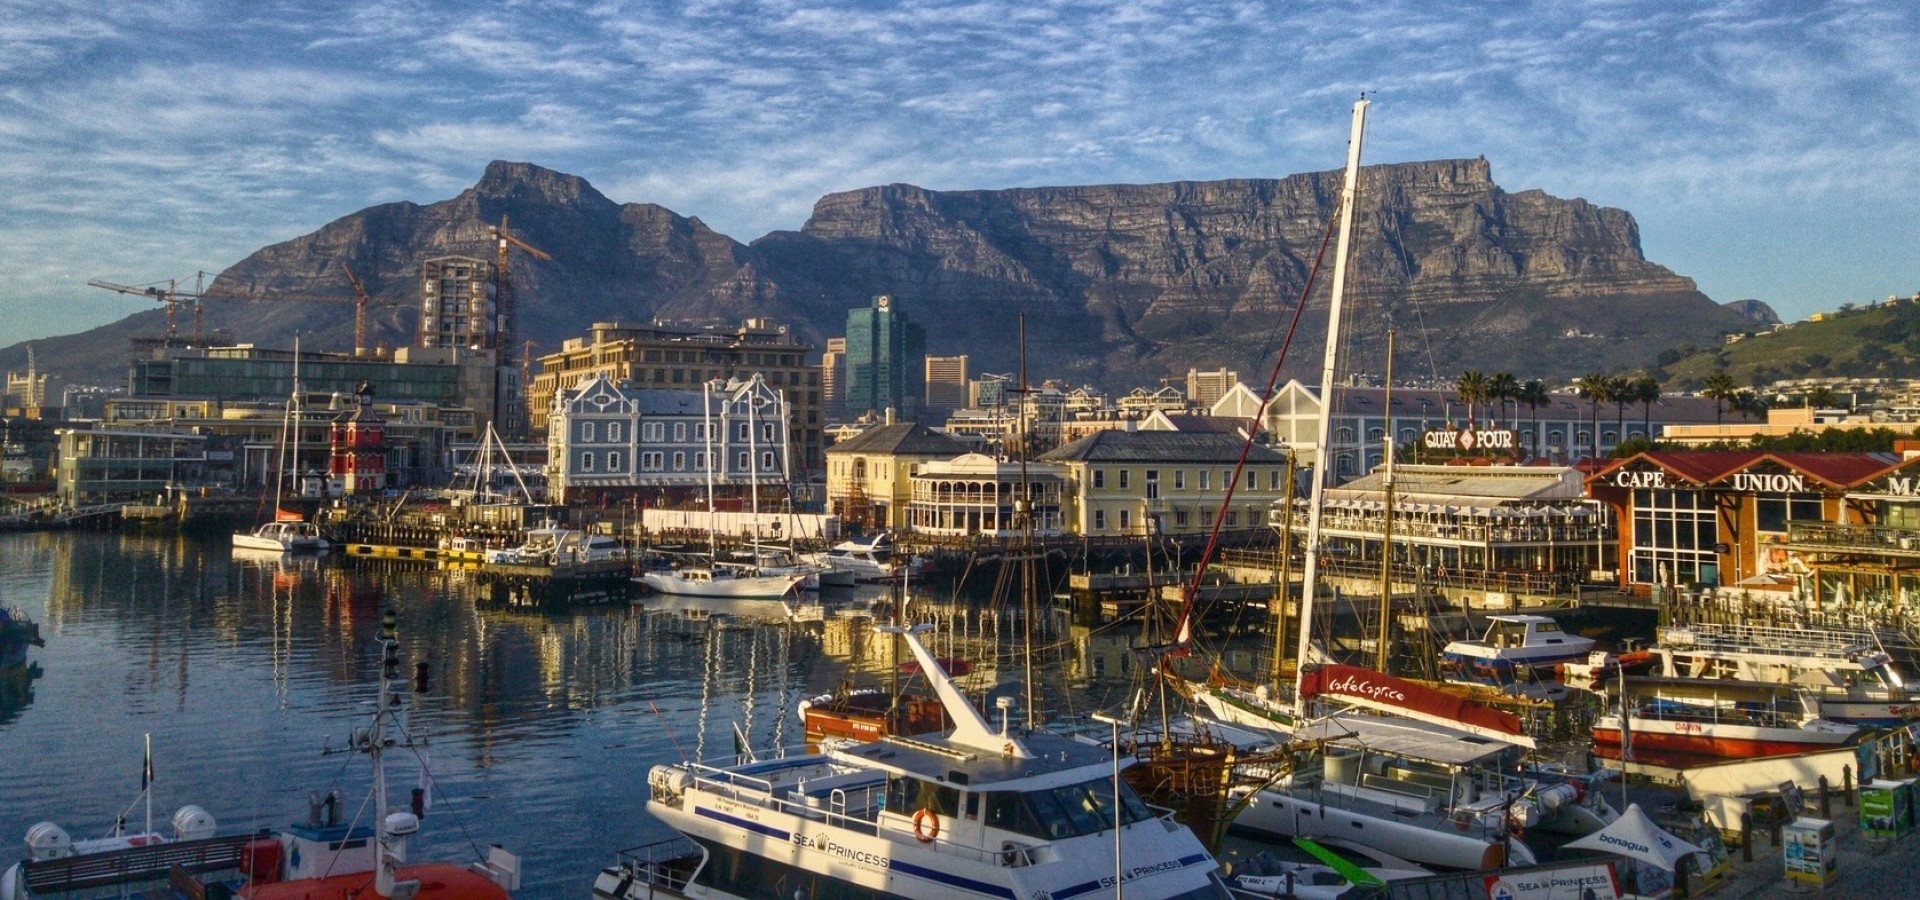 Cape Town South Africa Tourist Attractions | Hot Sex Picture